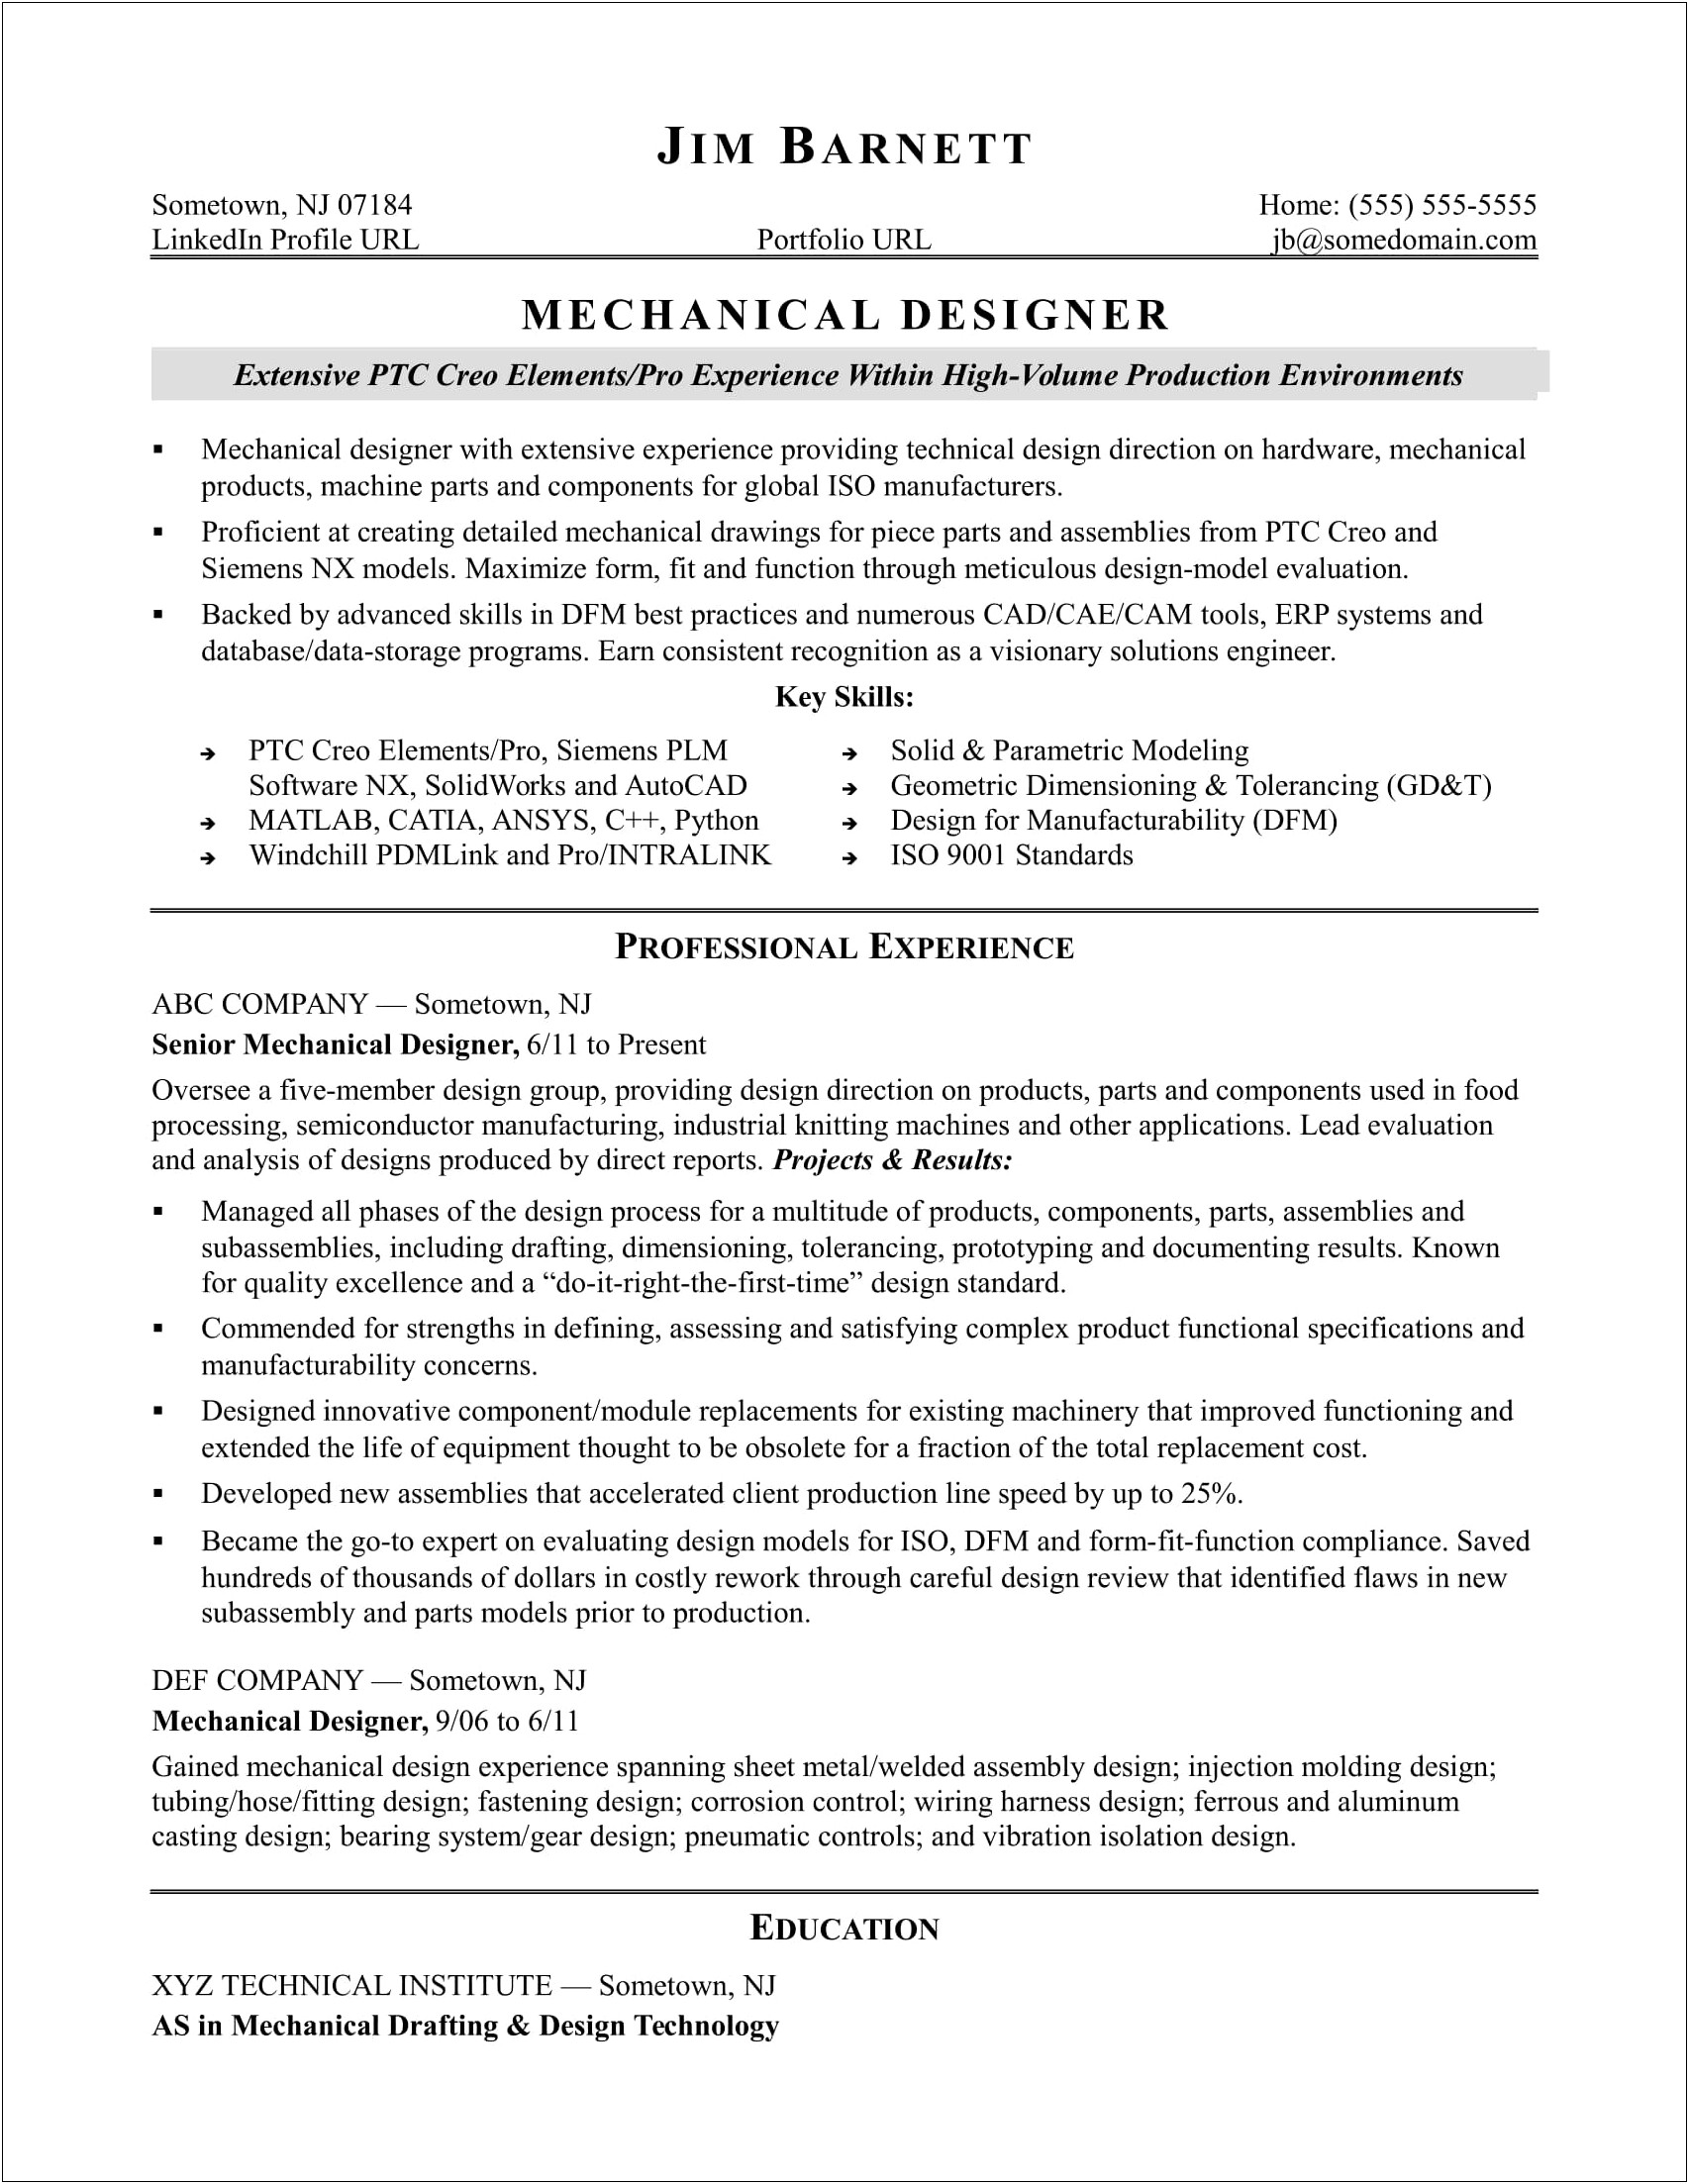 Experienced Design Engineer Resume Objective